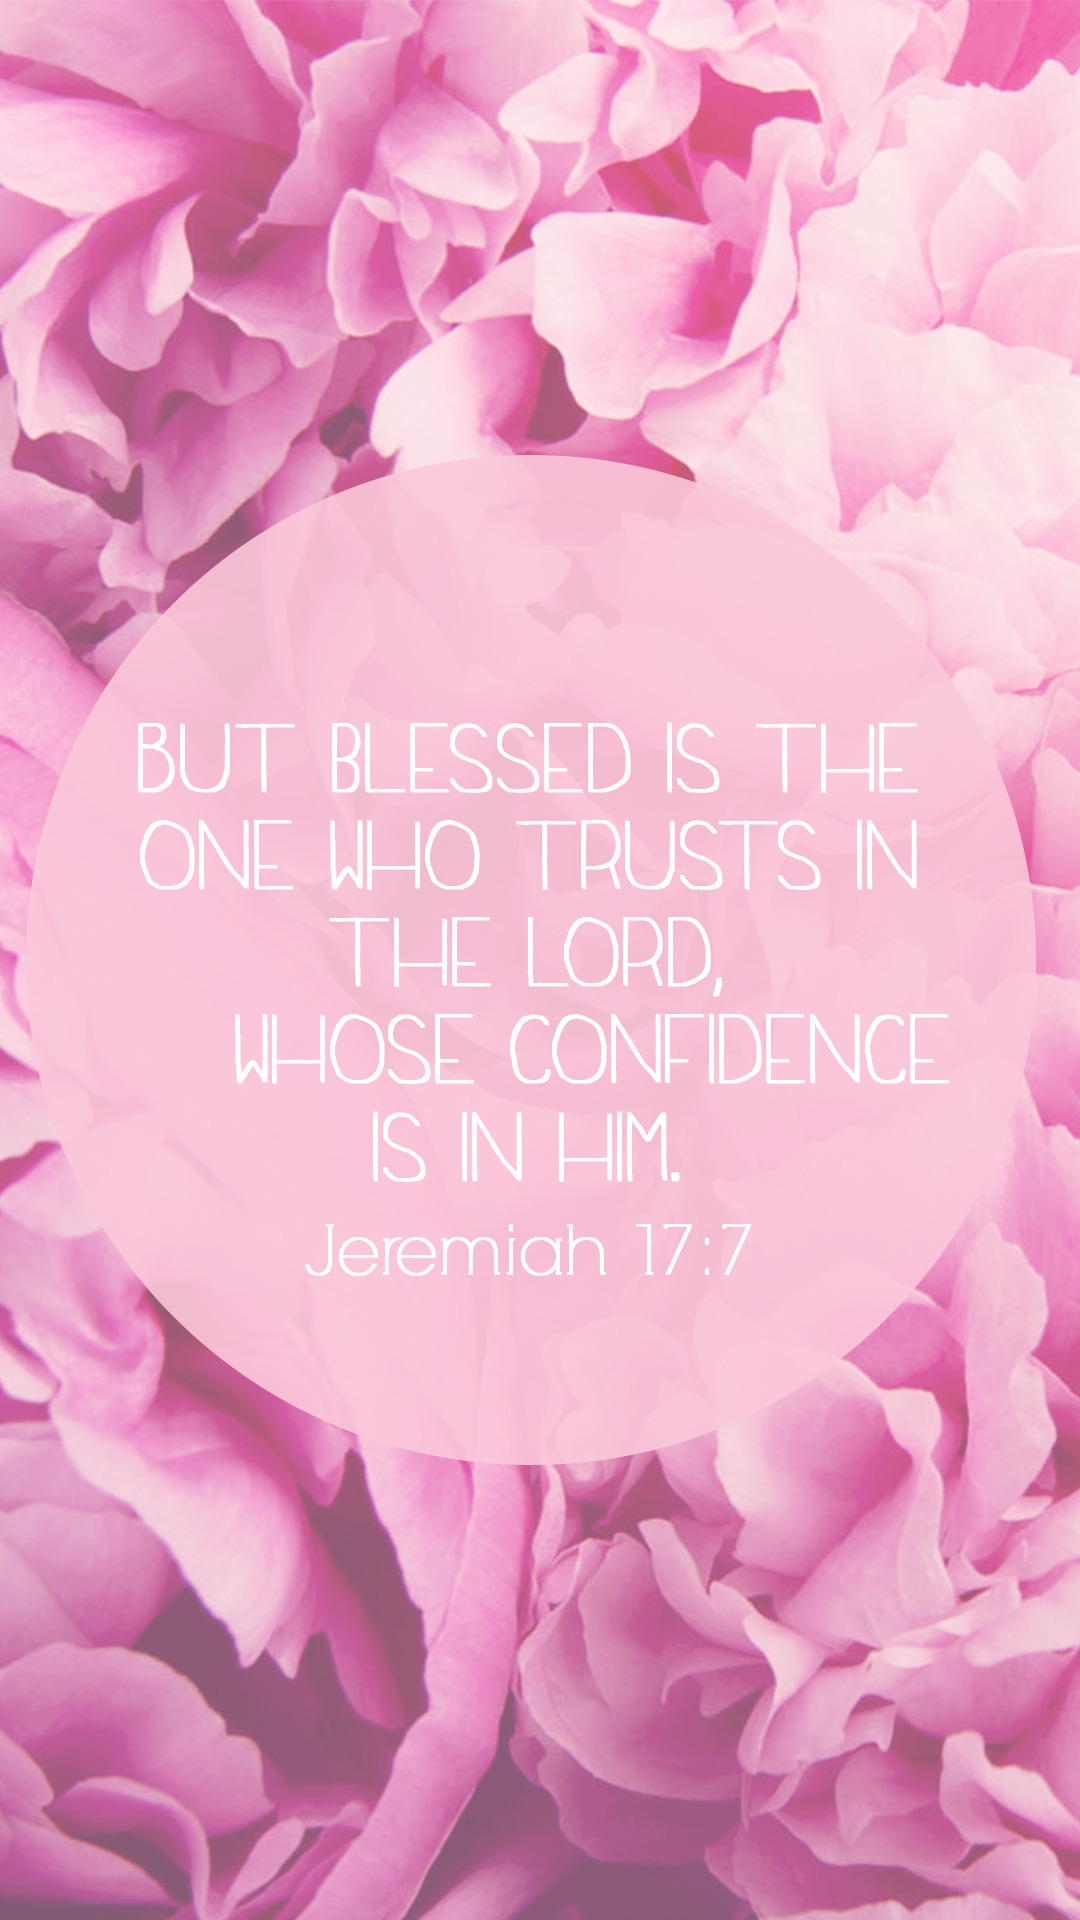 But Blessed Is The One Who Trusts In The Lord, Whose - Girly Bible Verse Backgrounds - HD Wallpaper 